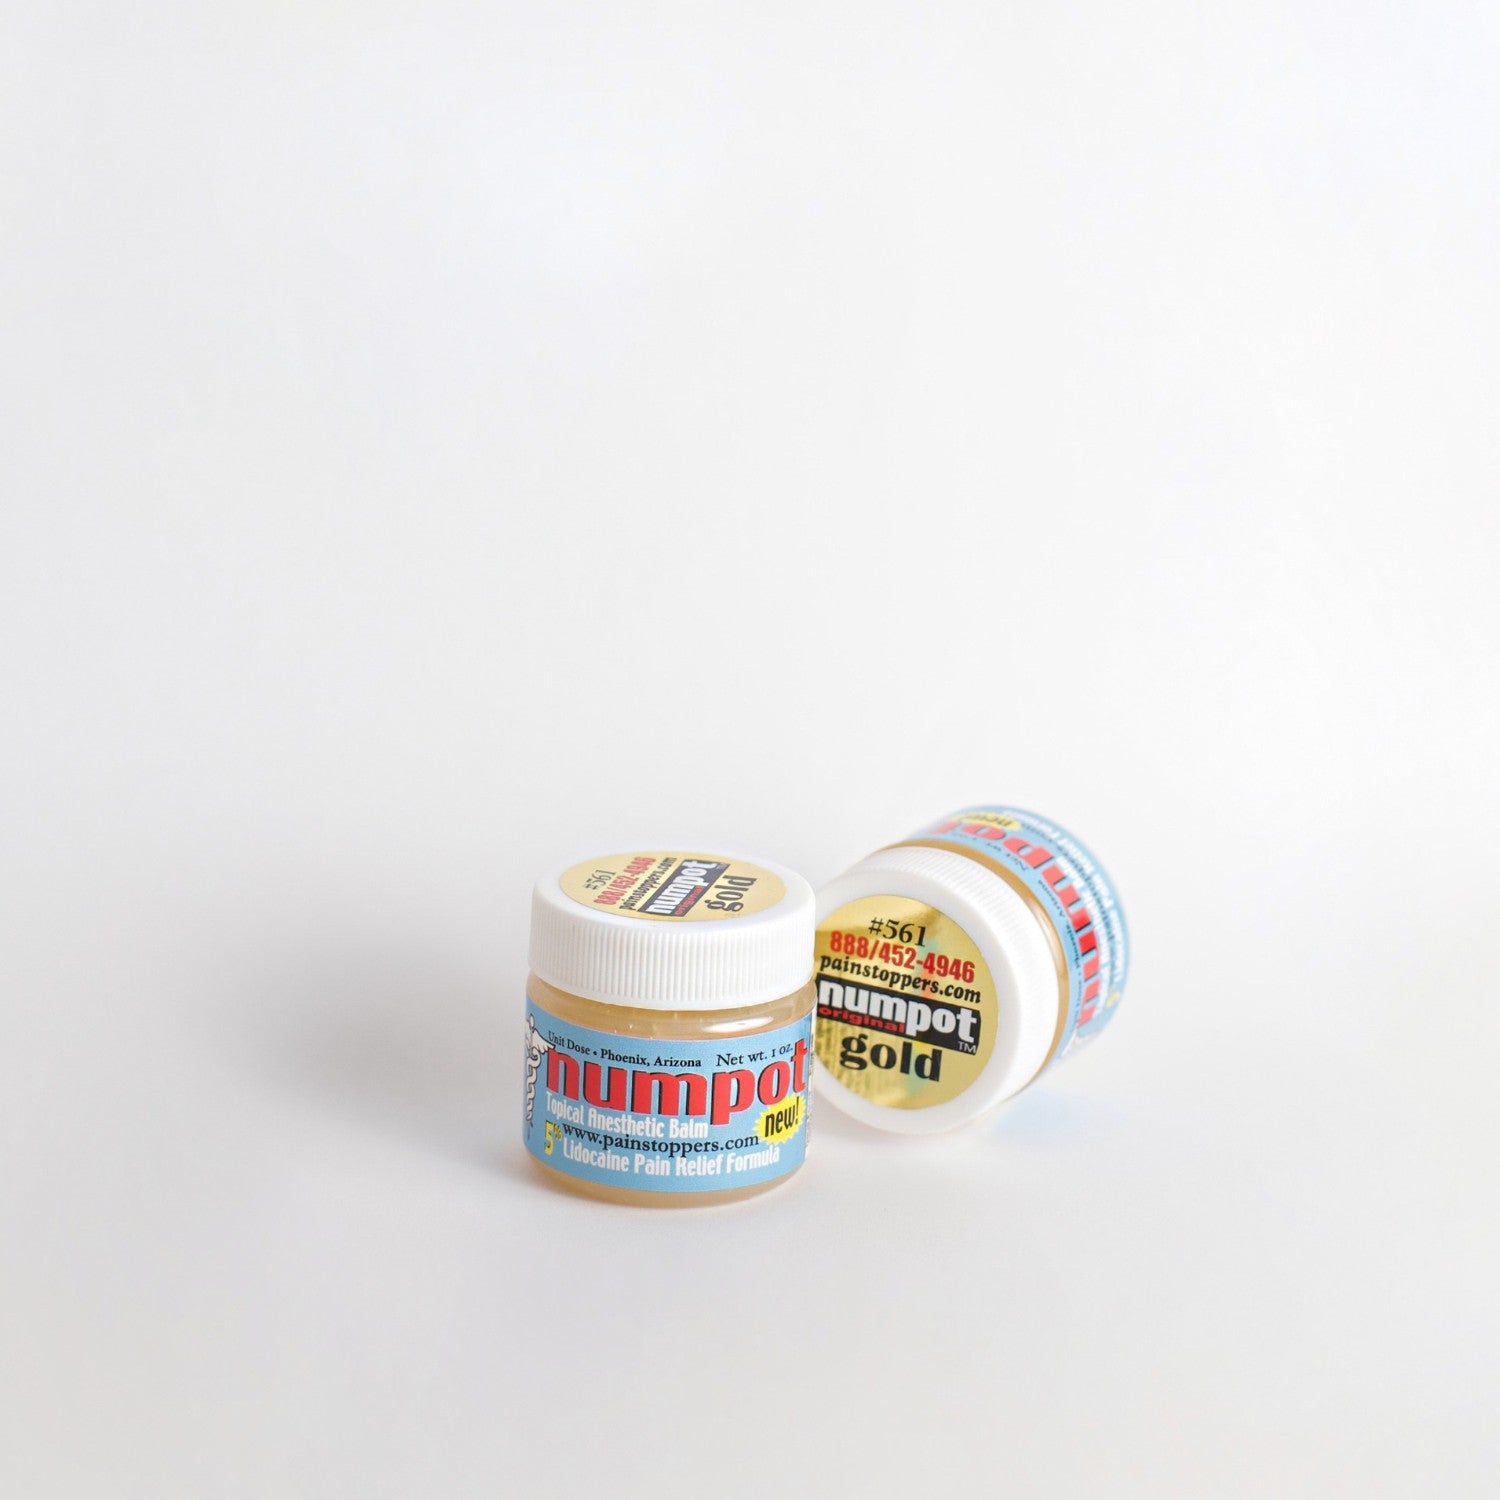 Numpot Gold ointment for Permanent Makeup, Painstoppers, Unit Dose Ltd, Topical Anesthetic Balm front side-by-side